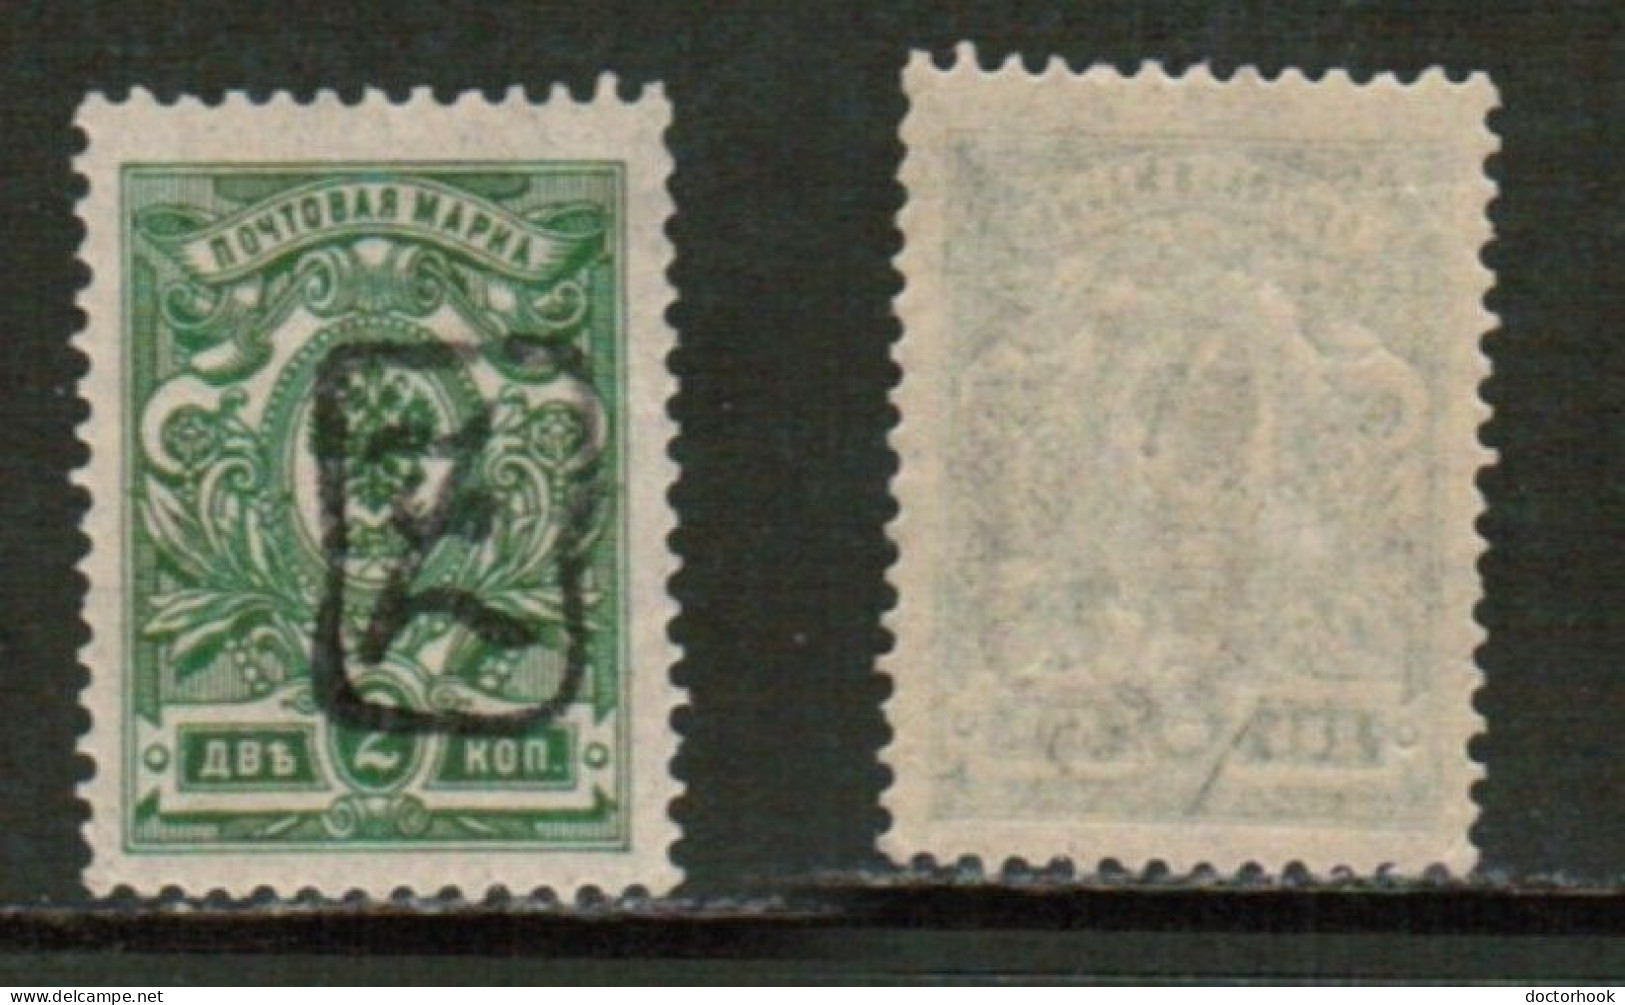 ARMANIA   Scott # 31a** MINT NH (CONDITION AS PER SCAN) (Stamp Scan # 920-5) - Armenien